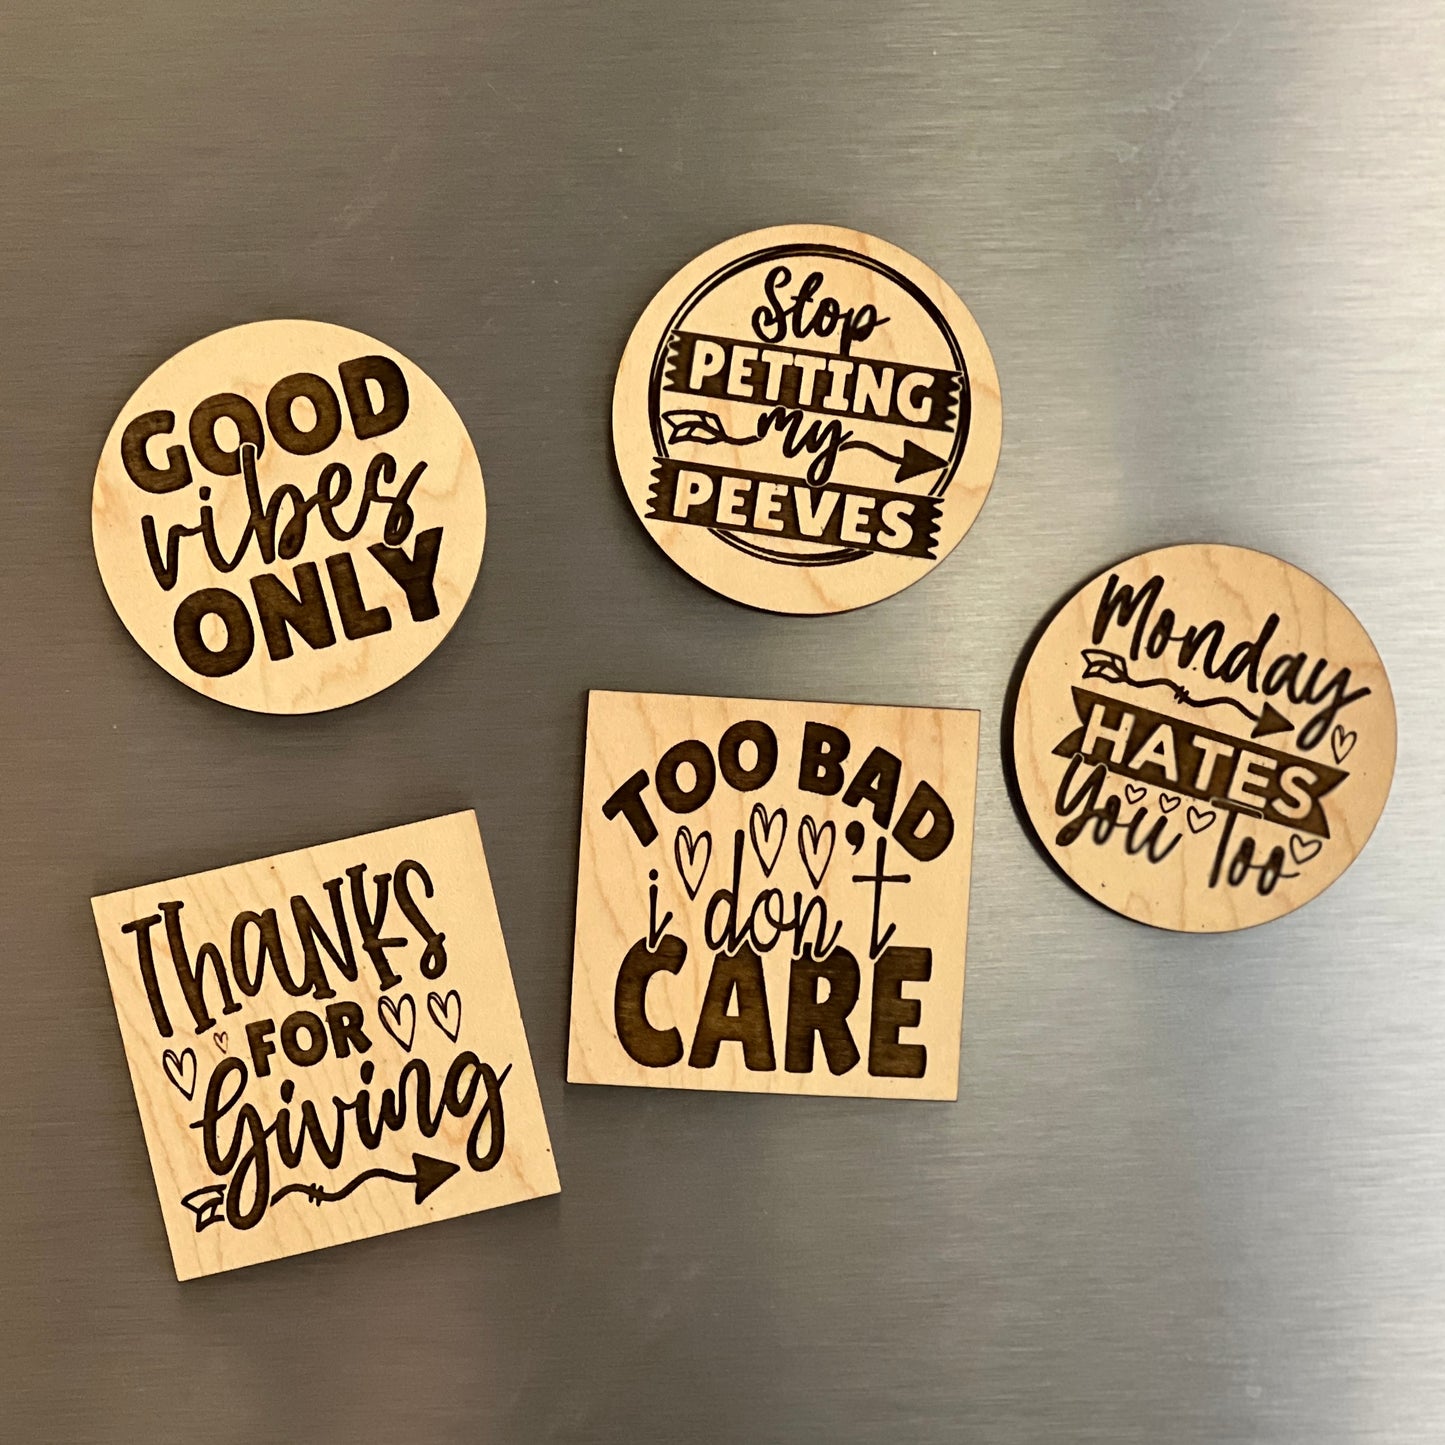 Good Vibes Only - Engraved Wooden Magnet